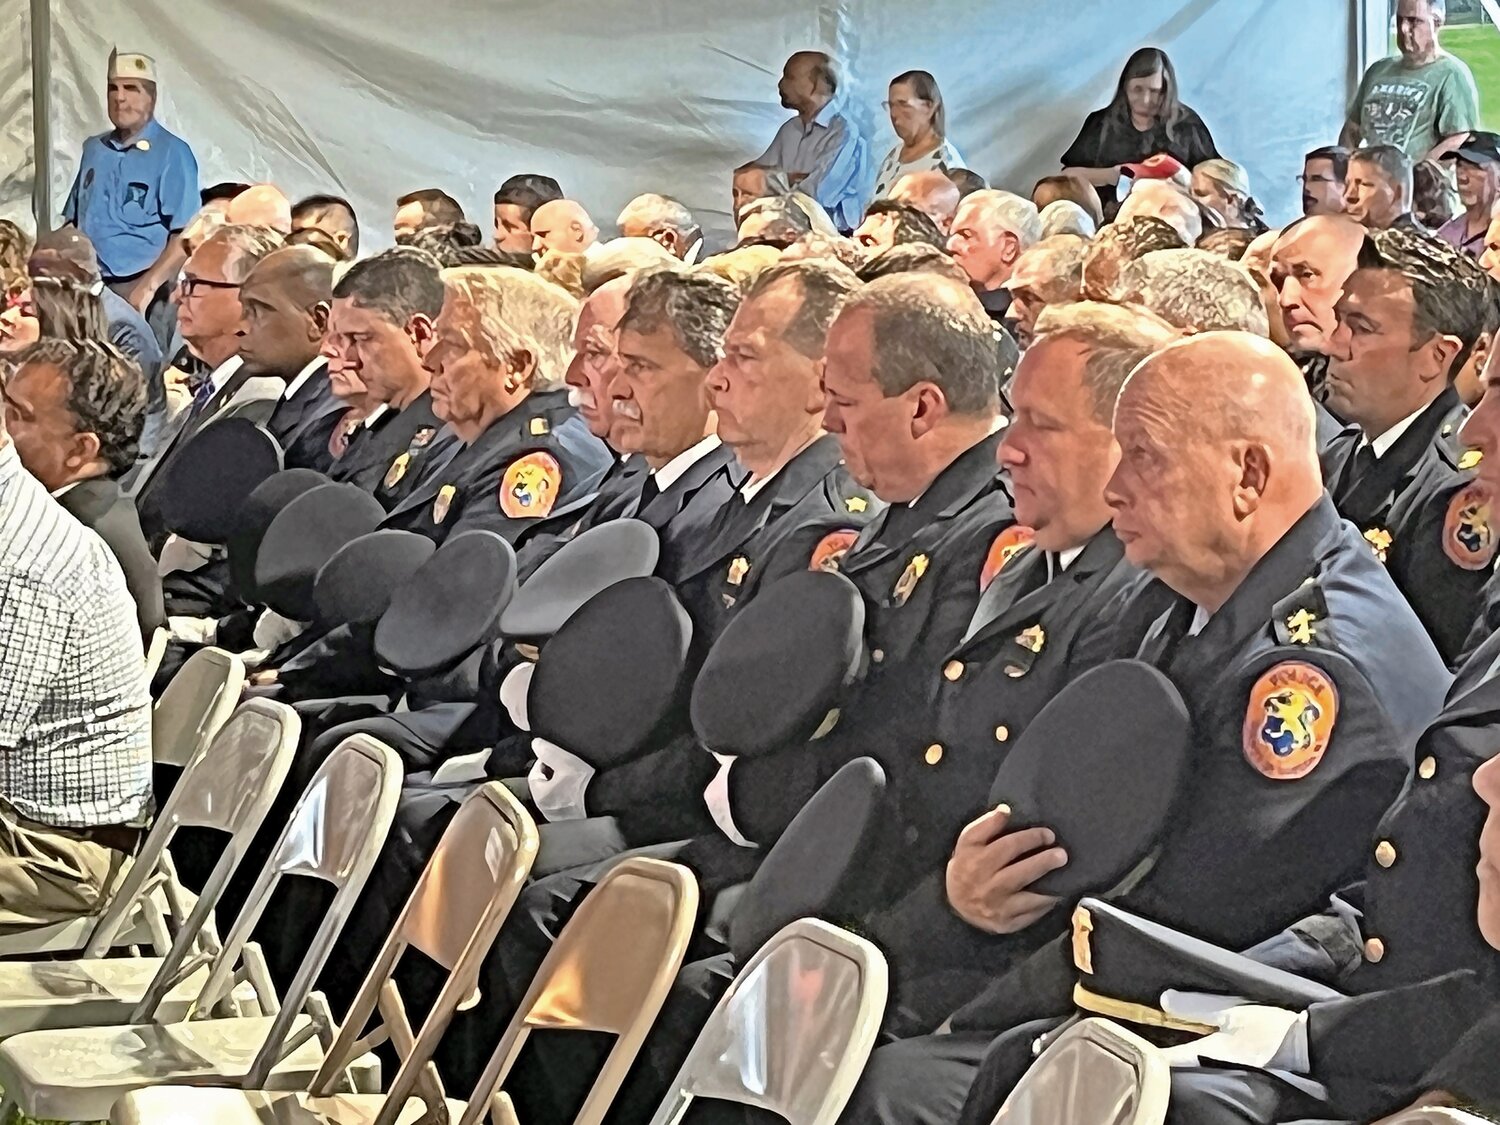 Members of the Nassau County Police Department remove their hats during one of several prayers shared during the Nassau County’s 9/11 Remembrance Ceremony and Musical Tribute at Eisenhower Park on Monday.